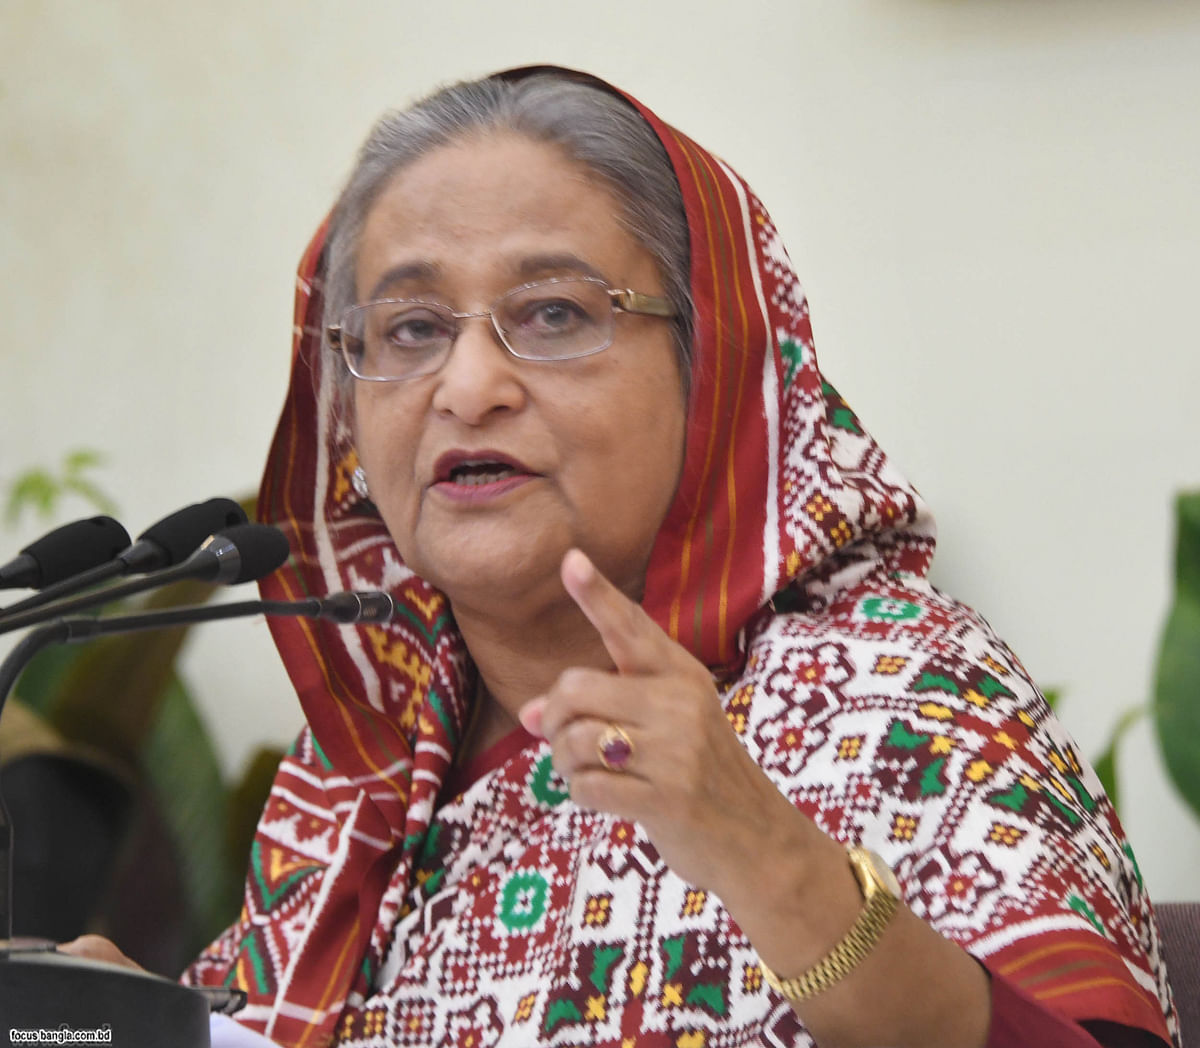 Prime minister Sheikh Hasina addresses a press conference at her official Ganabhaban residence on Monday to give the details about the outcome of her just-concluded visit to Italy and the Vatican City. Photo: Focus Bangla